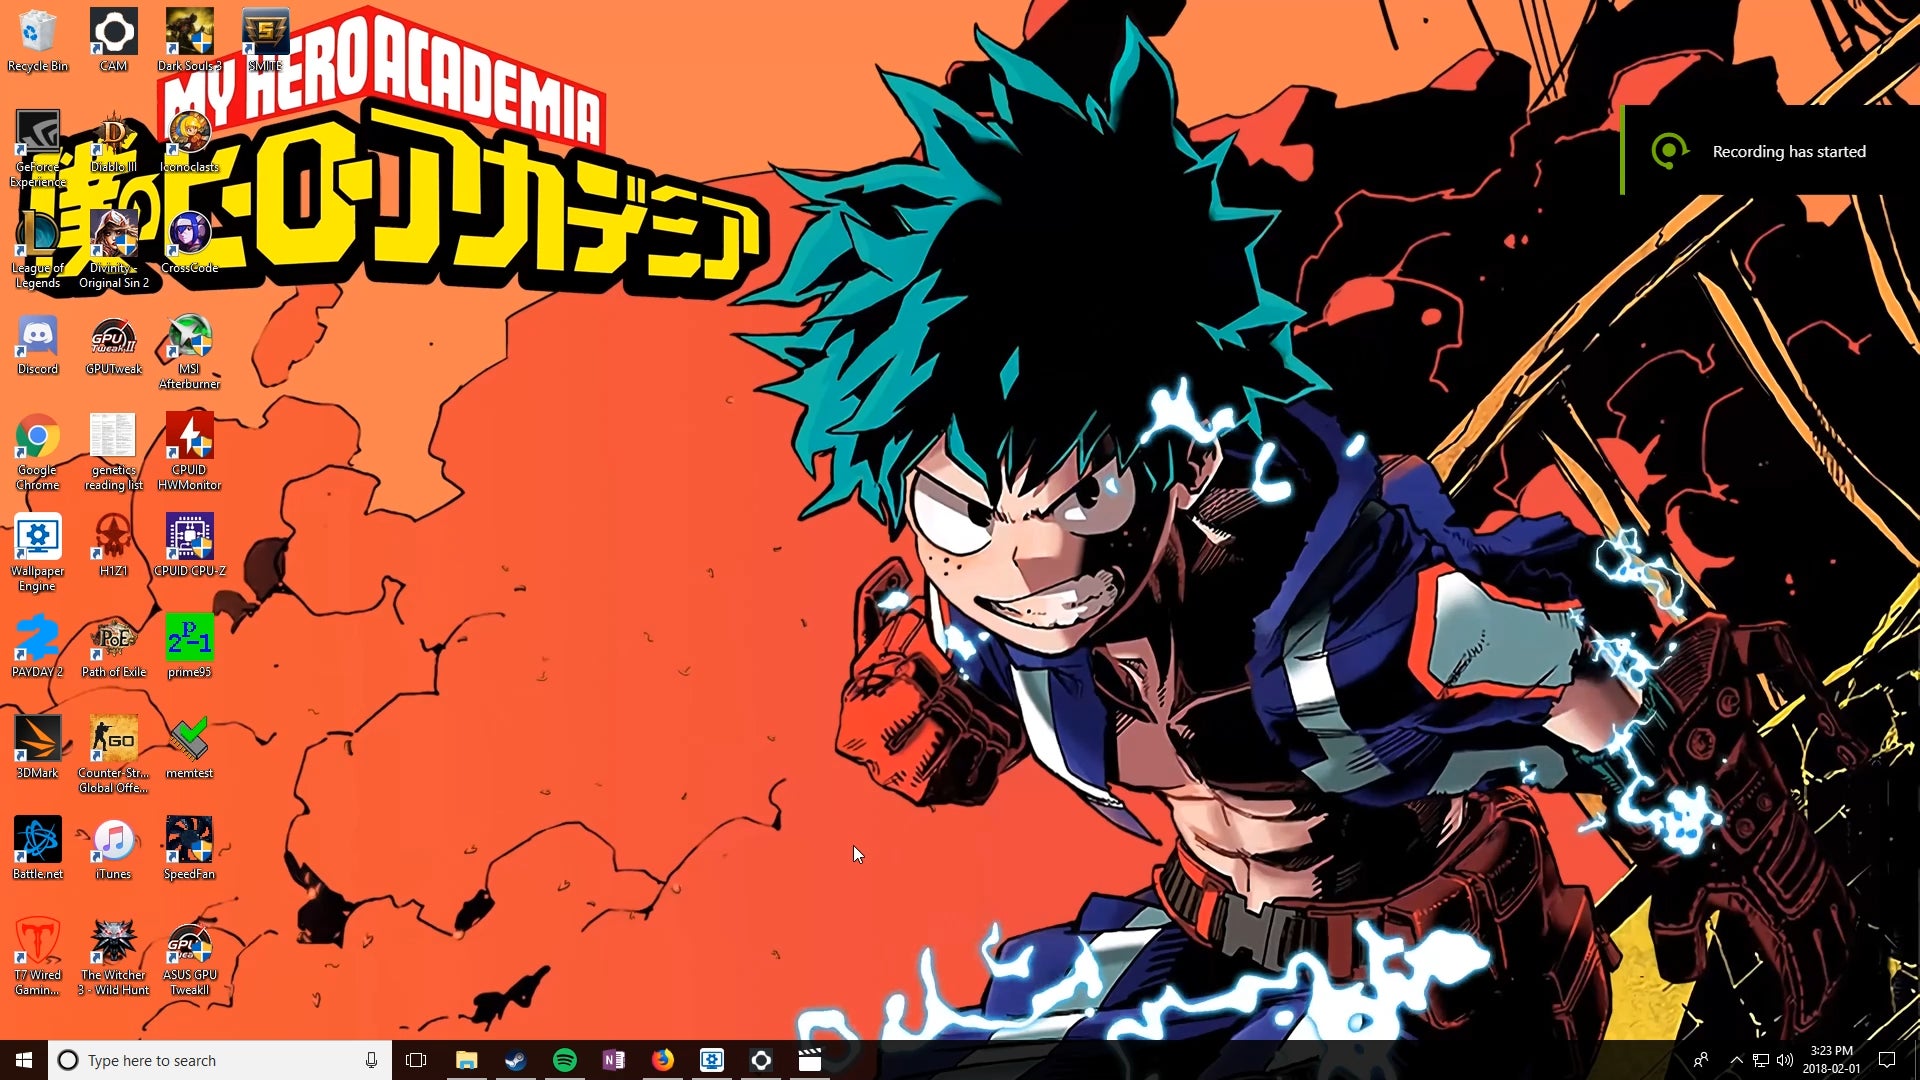 Bnha animated wallpapers